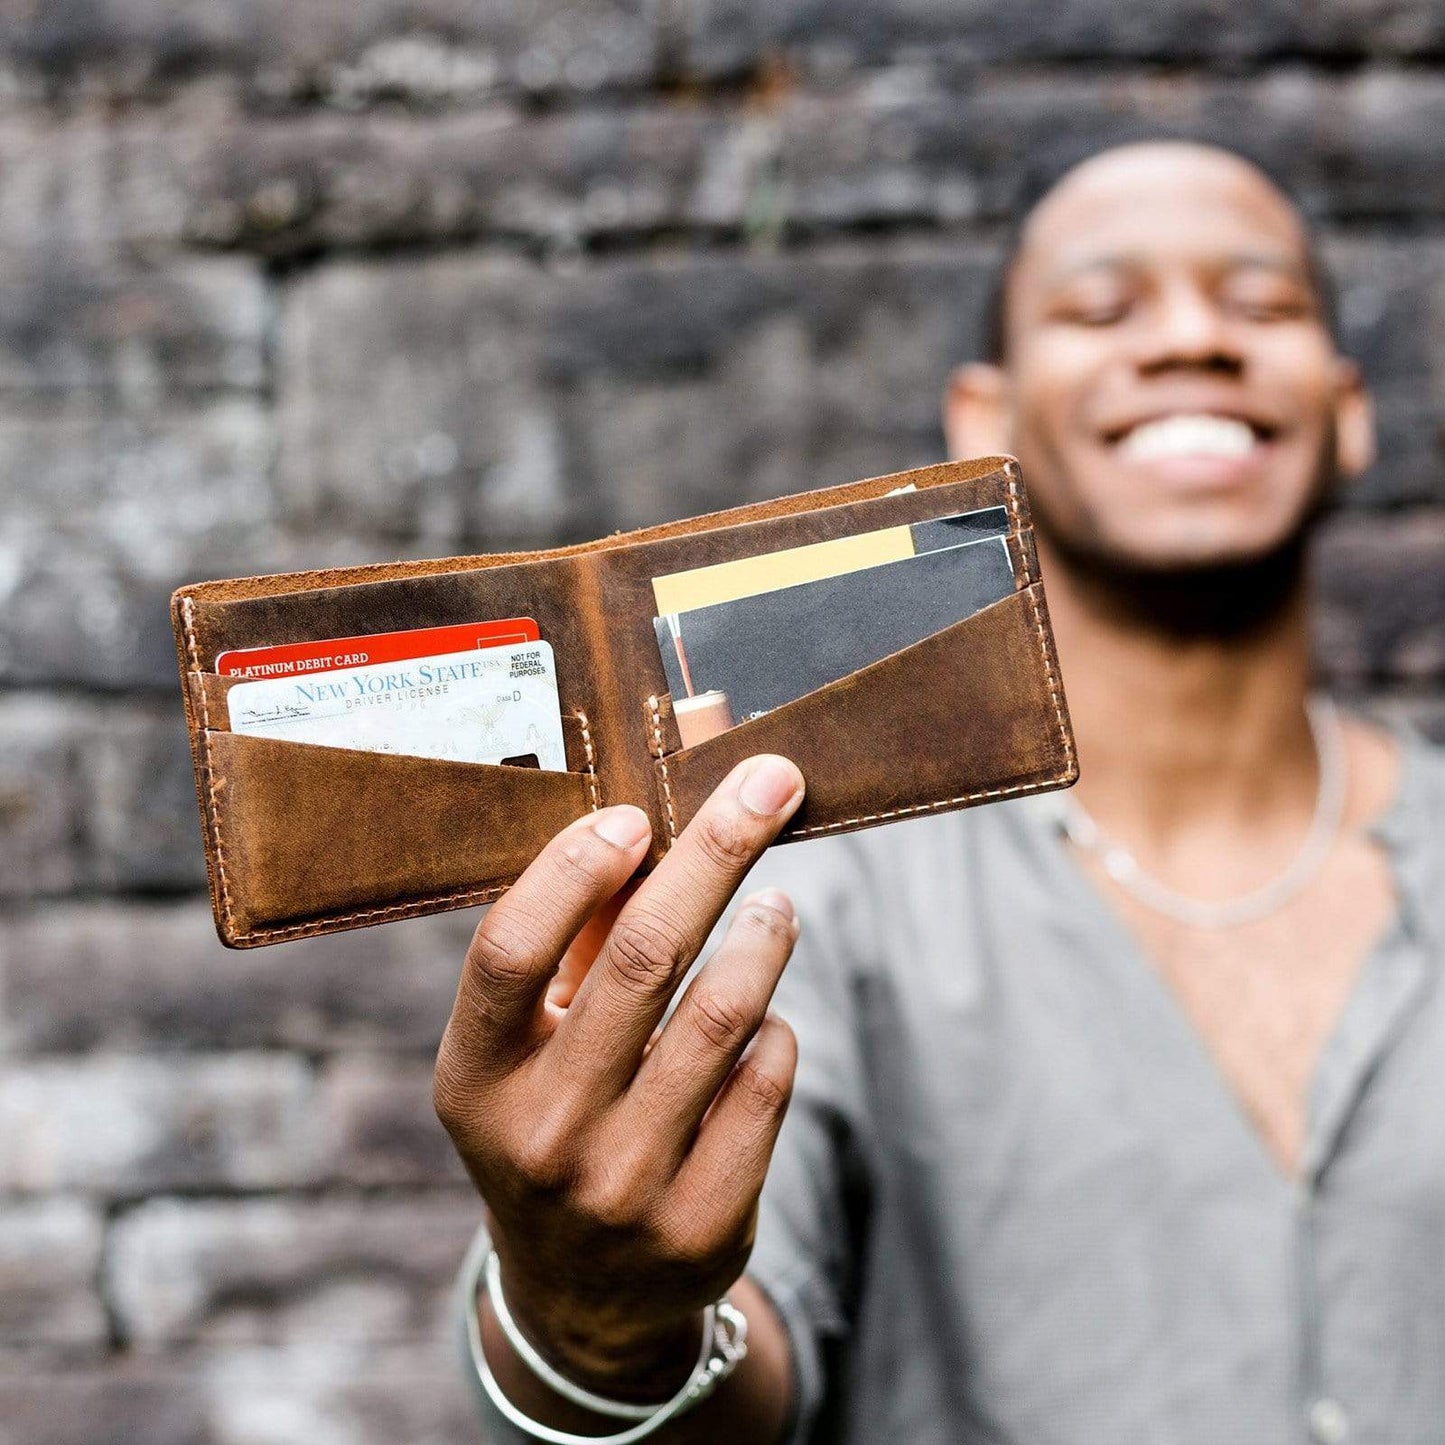 All Color: Canyon  | Men Wallet Leather Bifold